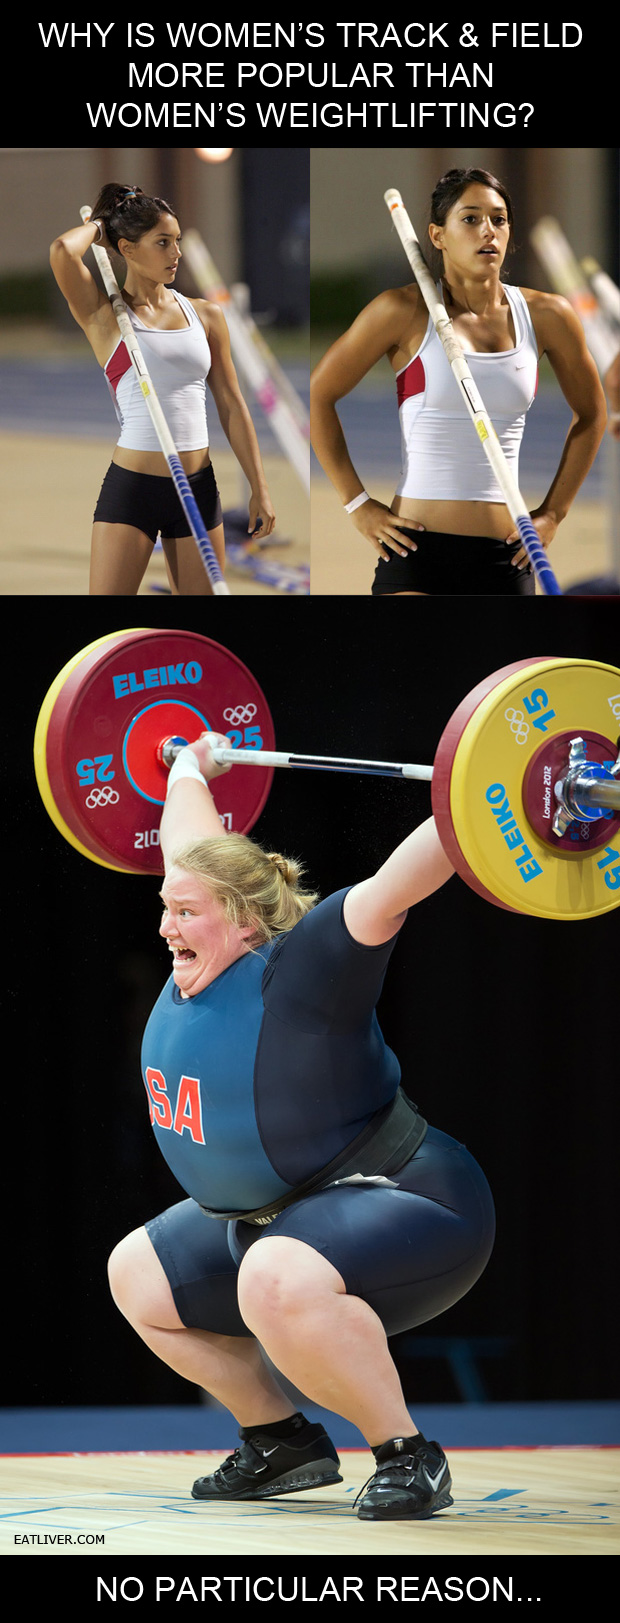 Women's track vs. Weightlifting.